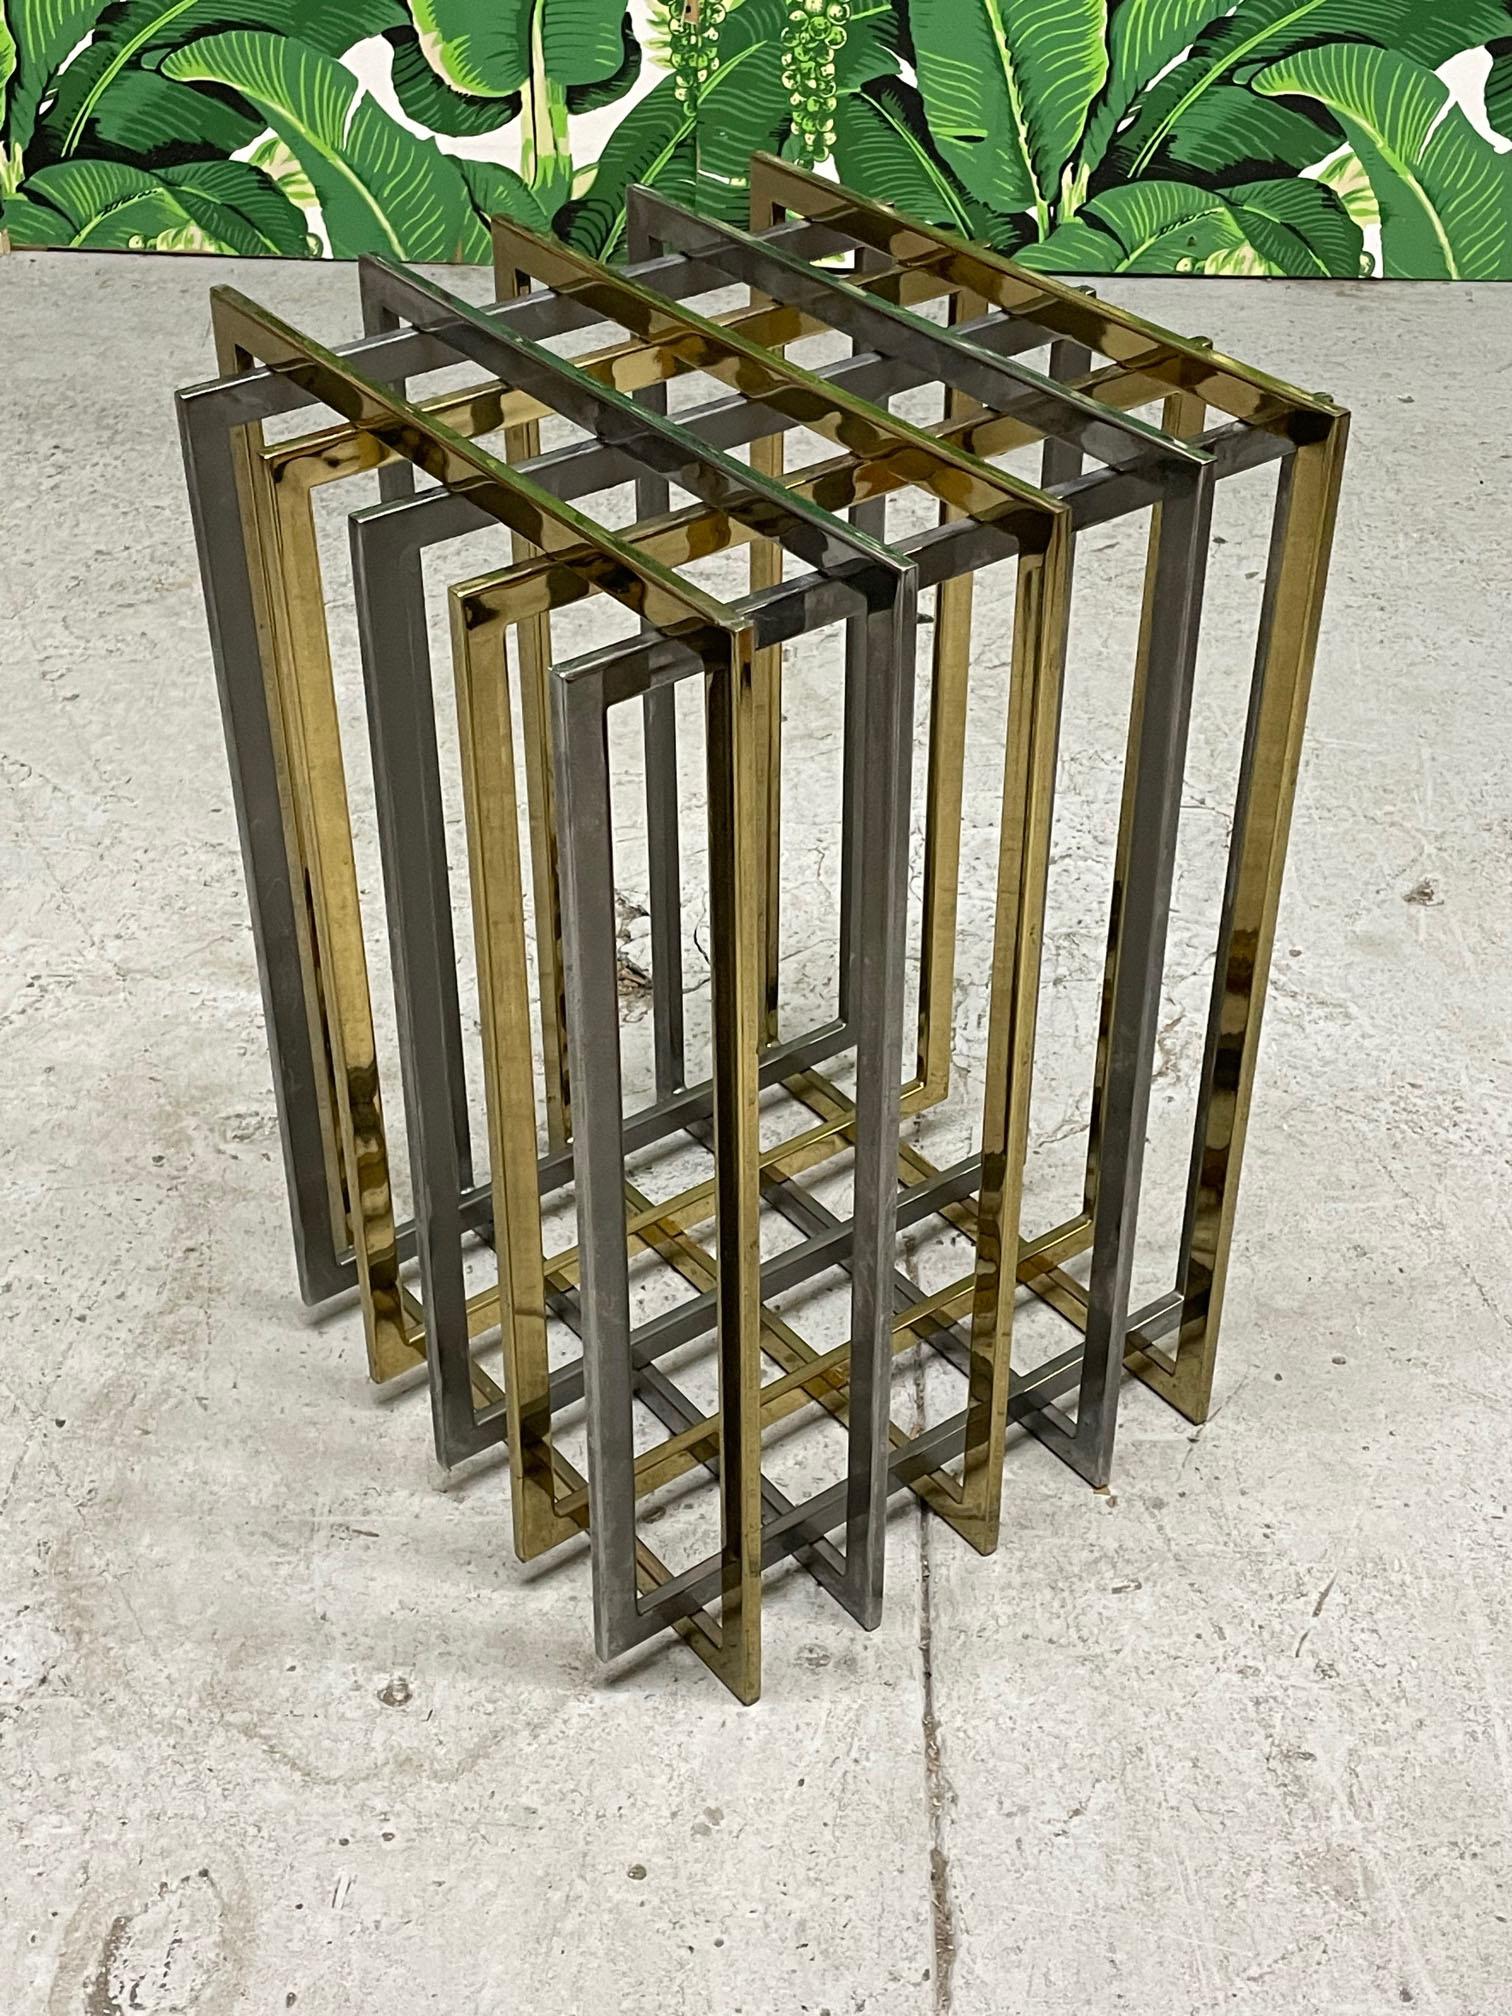 Pierre Cardin mixed metal cubist dining table base features alternating bands of brass and chrome form a square, or can be adjusted to become a diamond shape. Very heavy. Very good condition with minor imperfections consistent with age. May exhibit